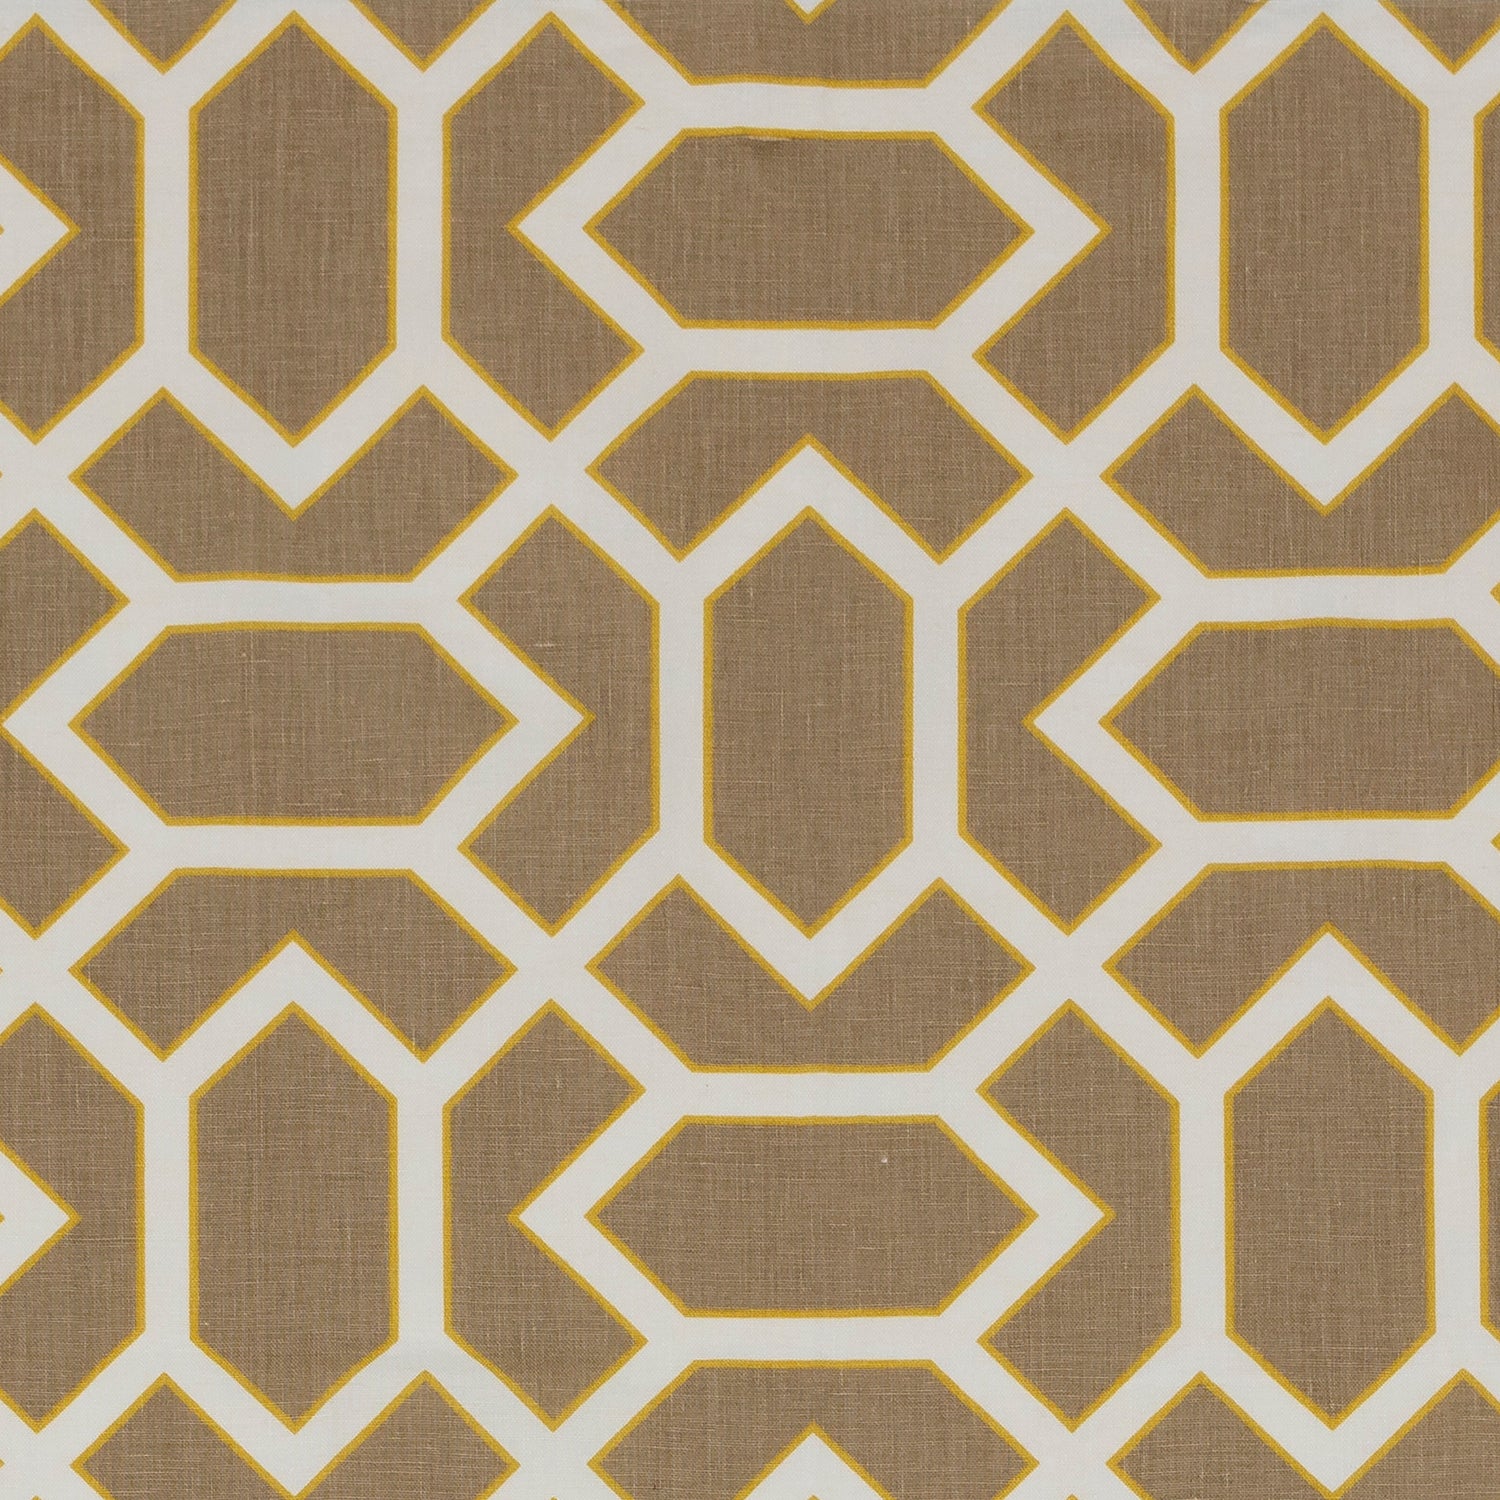 Fabric in a geometric lattice print in cream and yellow on a brown field.